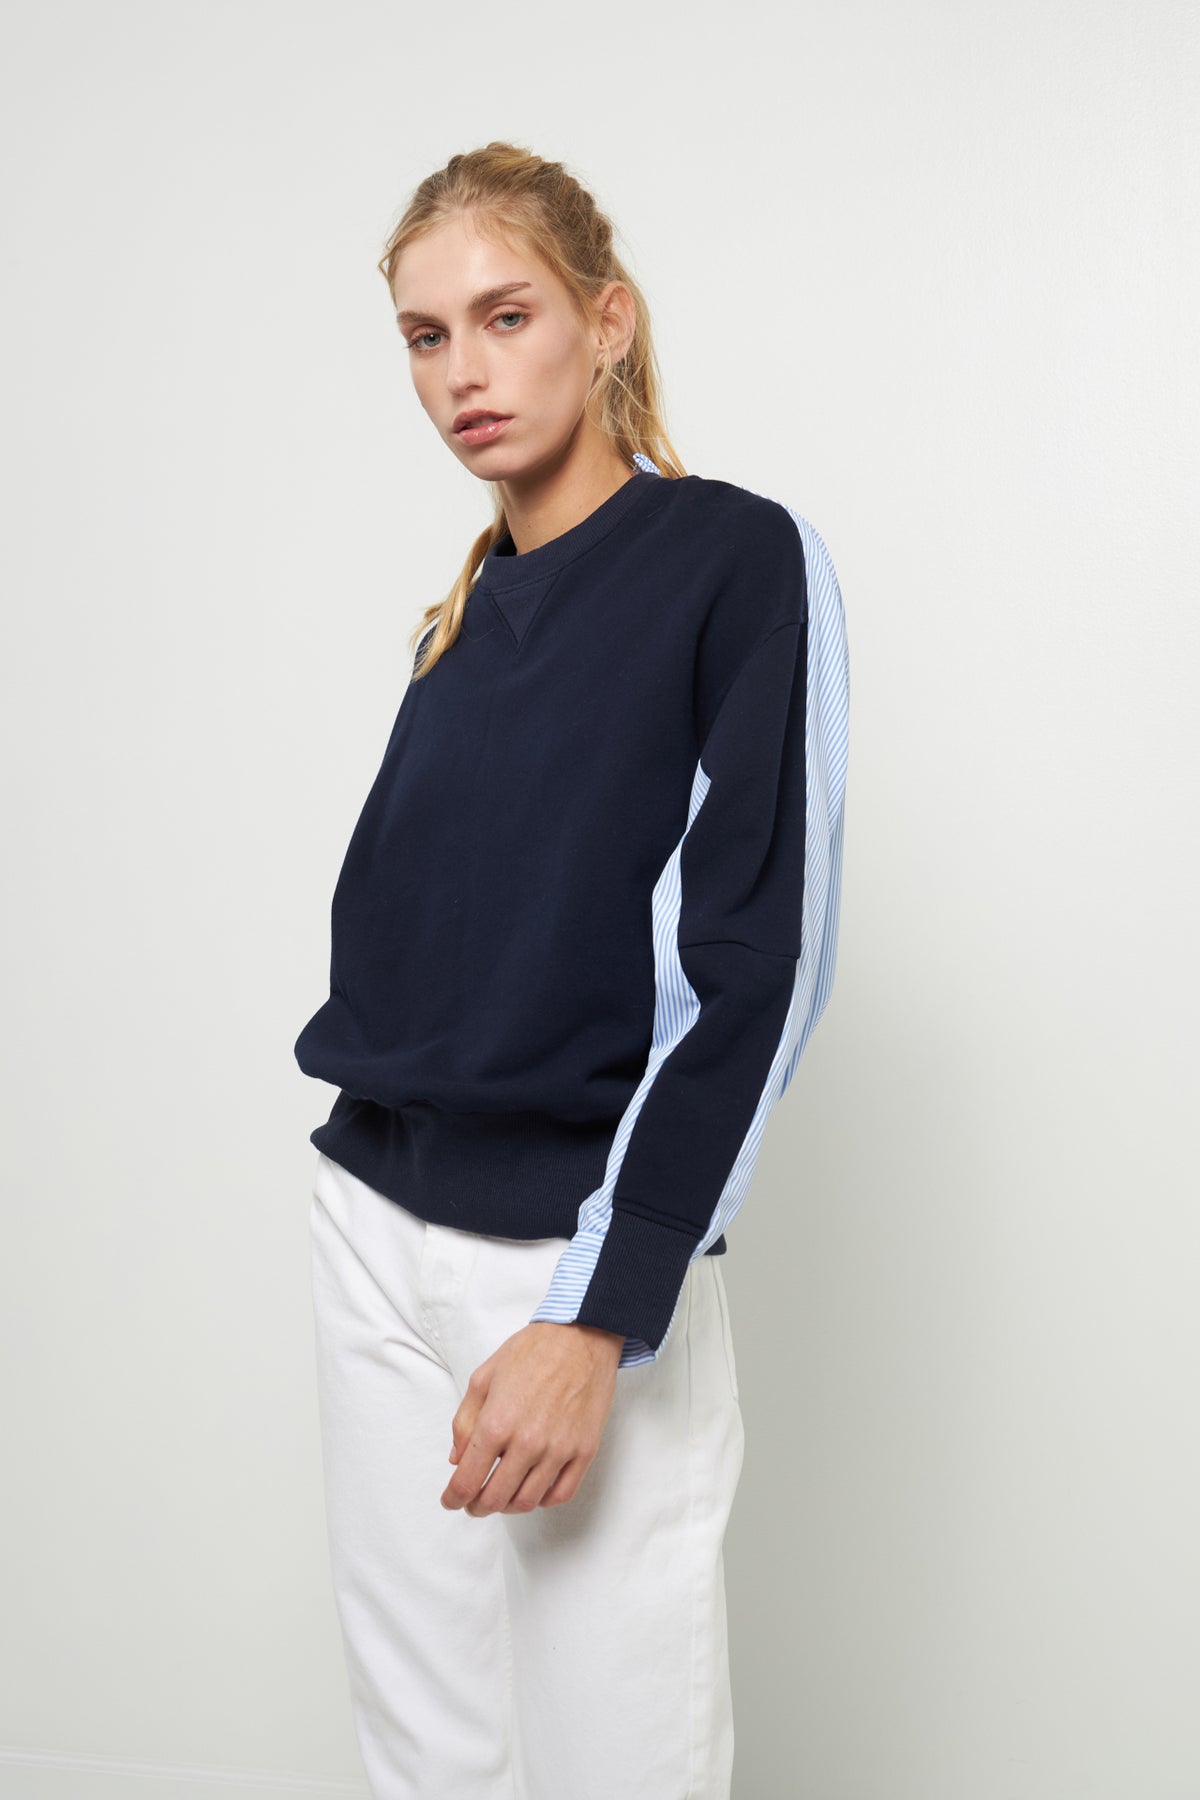 ENGLISH FACTORY - KNIT TOP WITH STRIPE SHIRTS COMBO - TOPS available at Objectrare